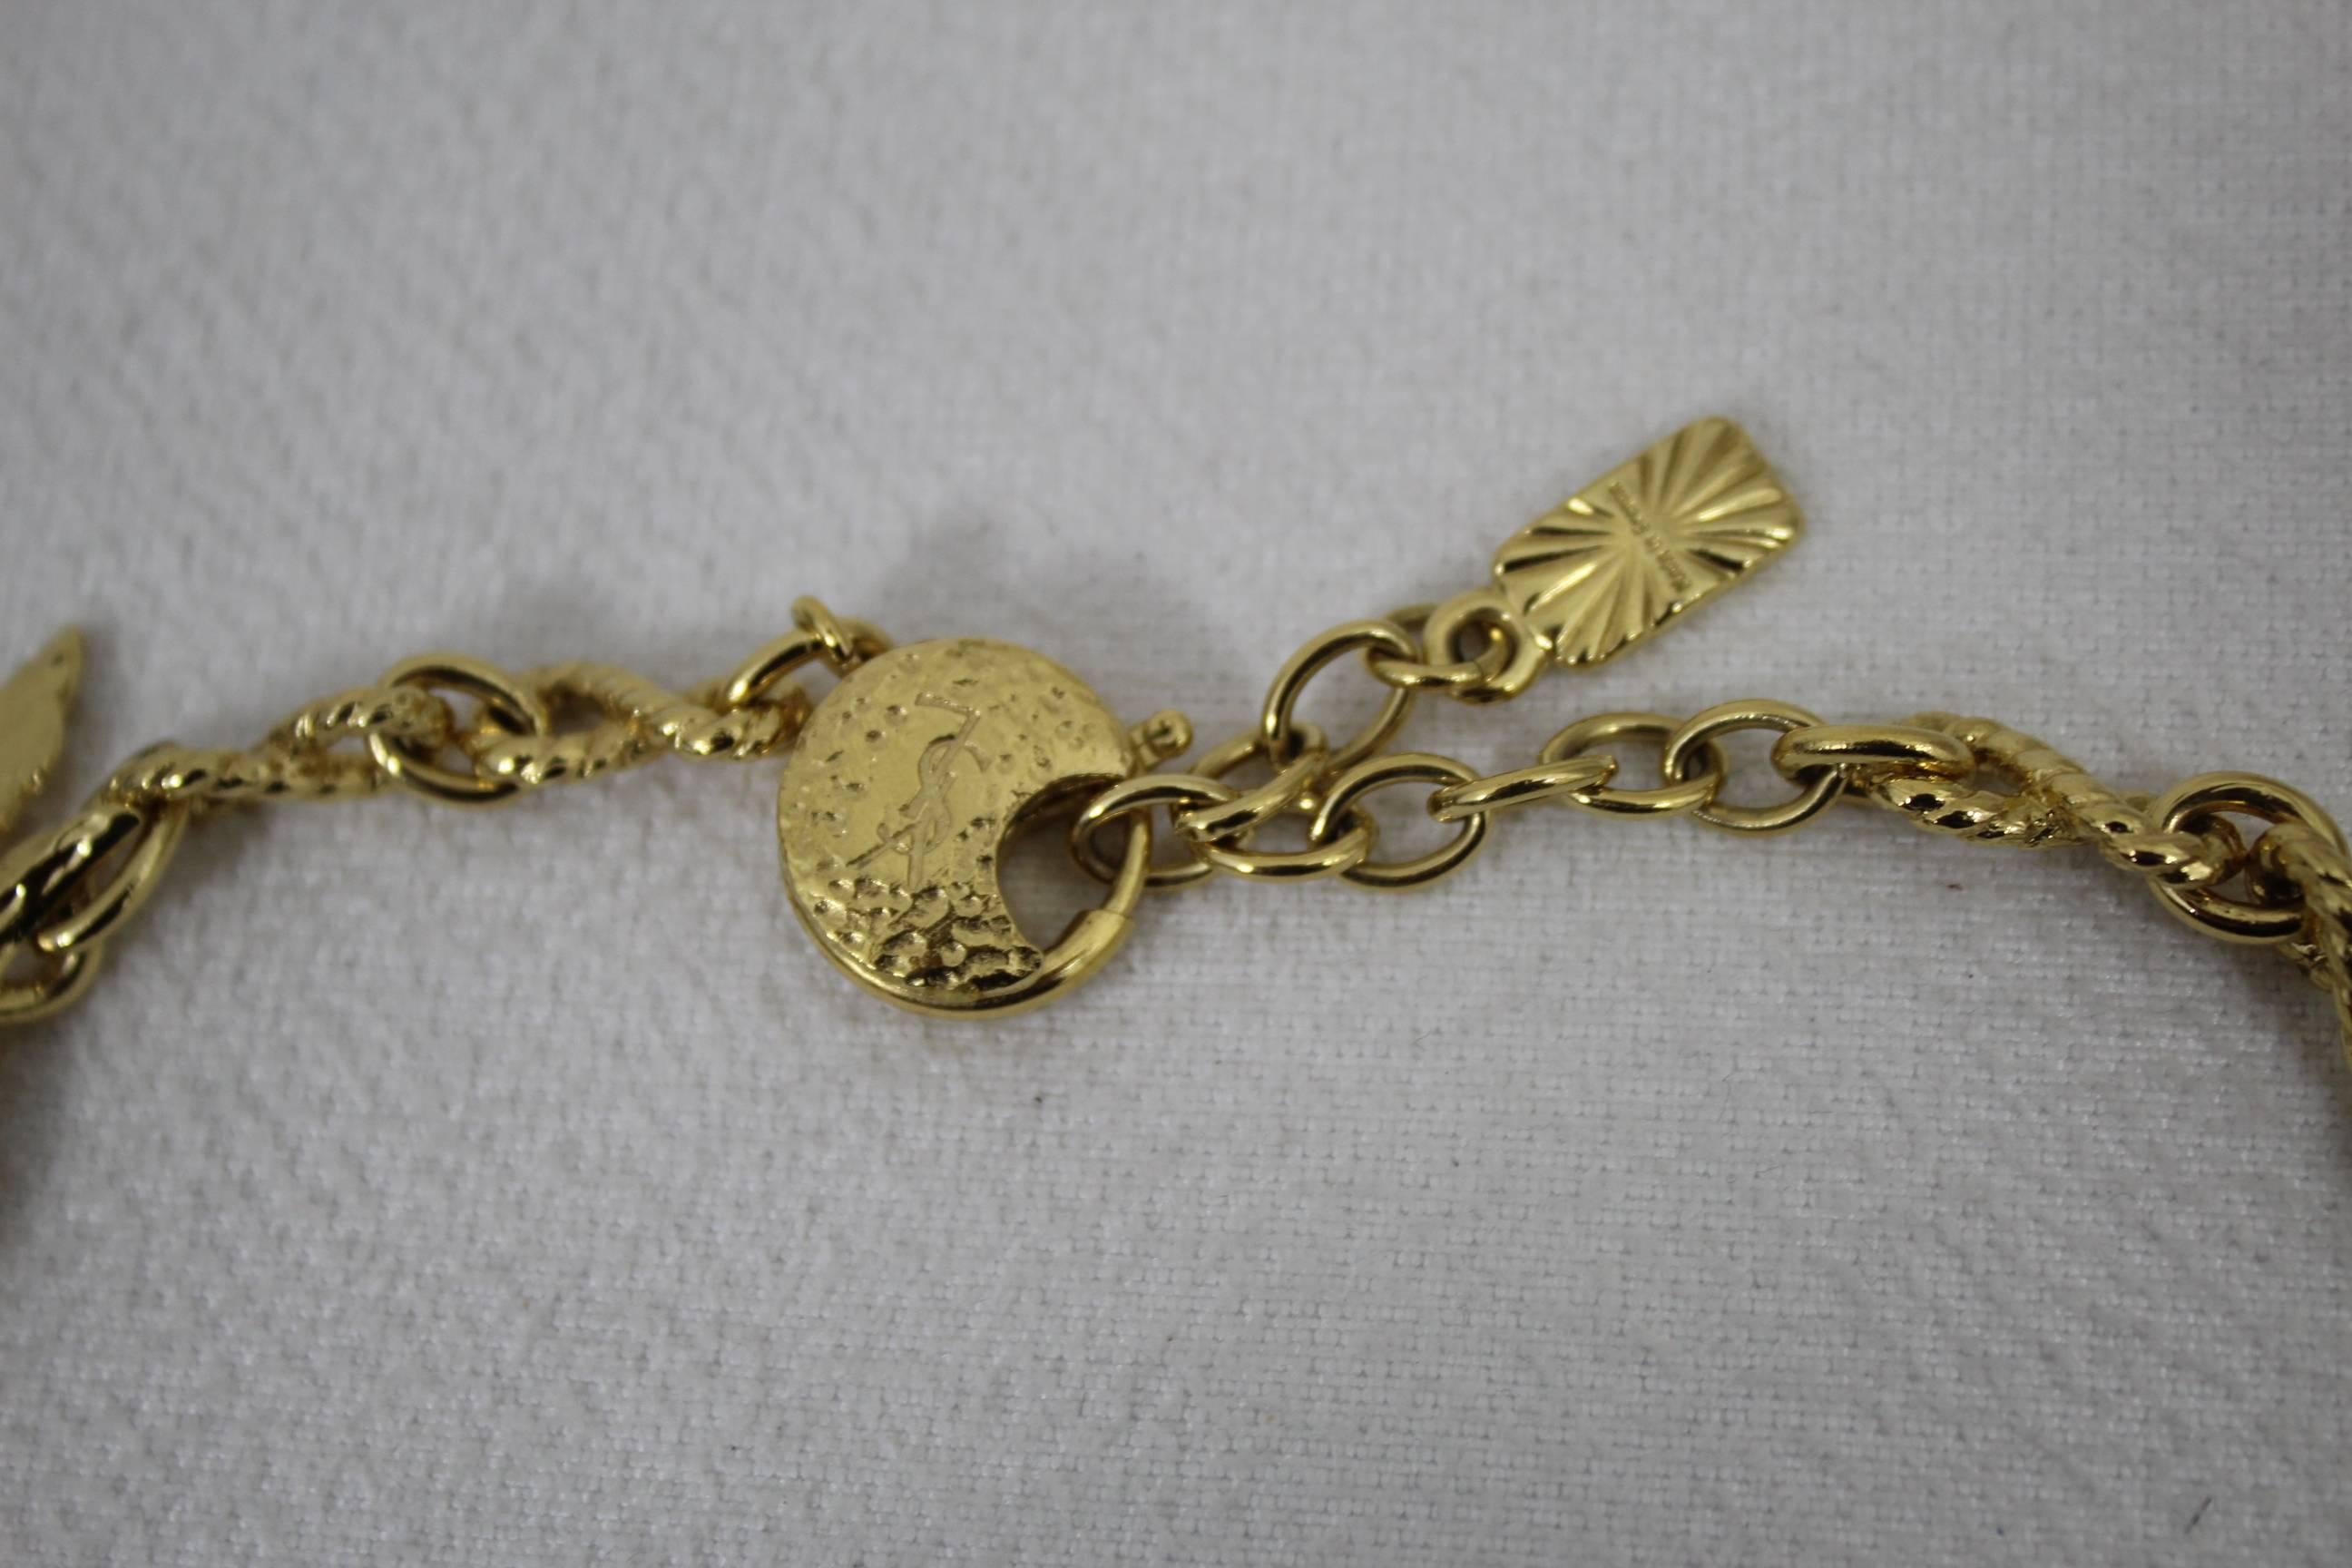 Really nice collector Yves Saint Laurent Birds Necklace in gold plated metal.

Really good condition 

Maximum Lenght 19 inches 